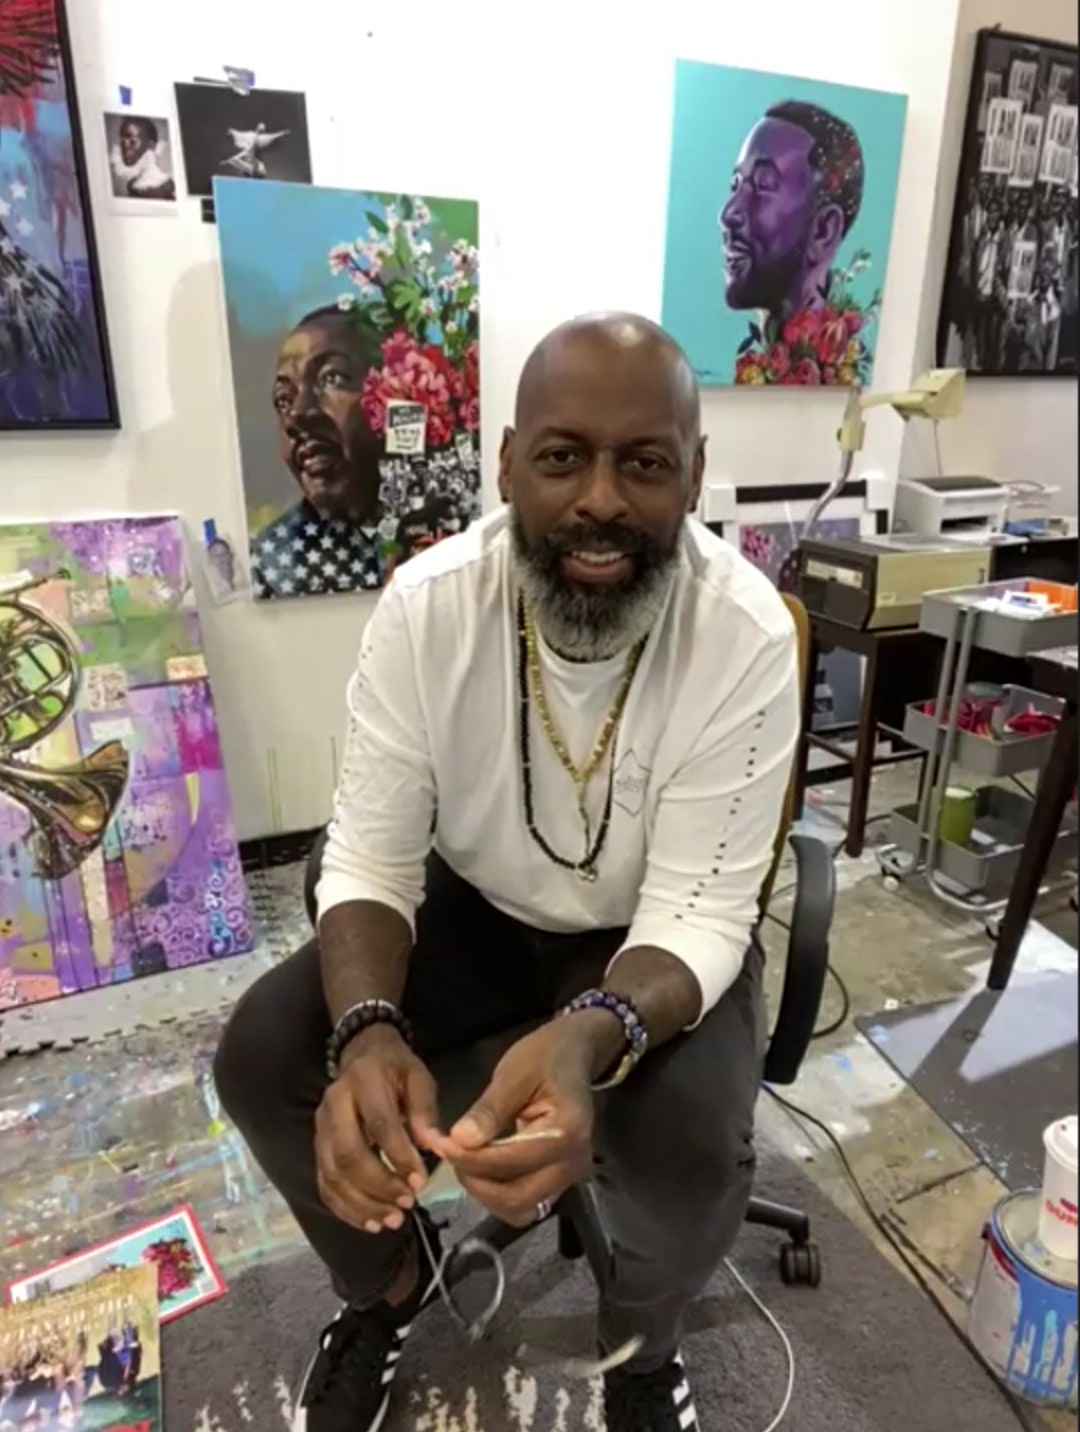 Image of artist and illustrator Charly Palmer in Studio